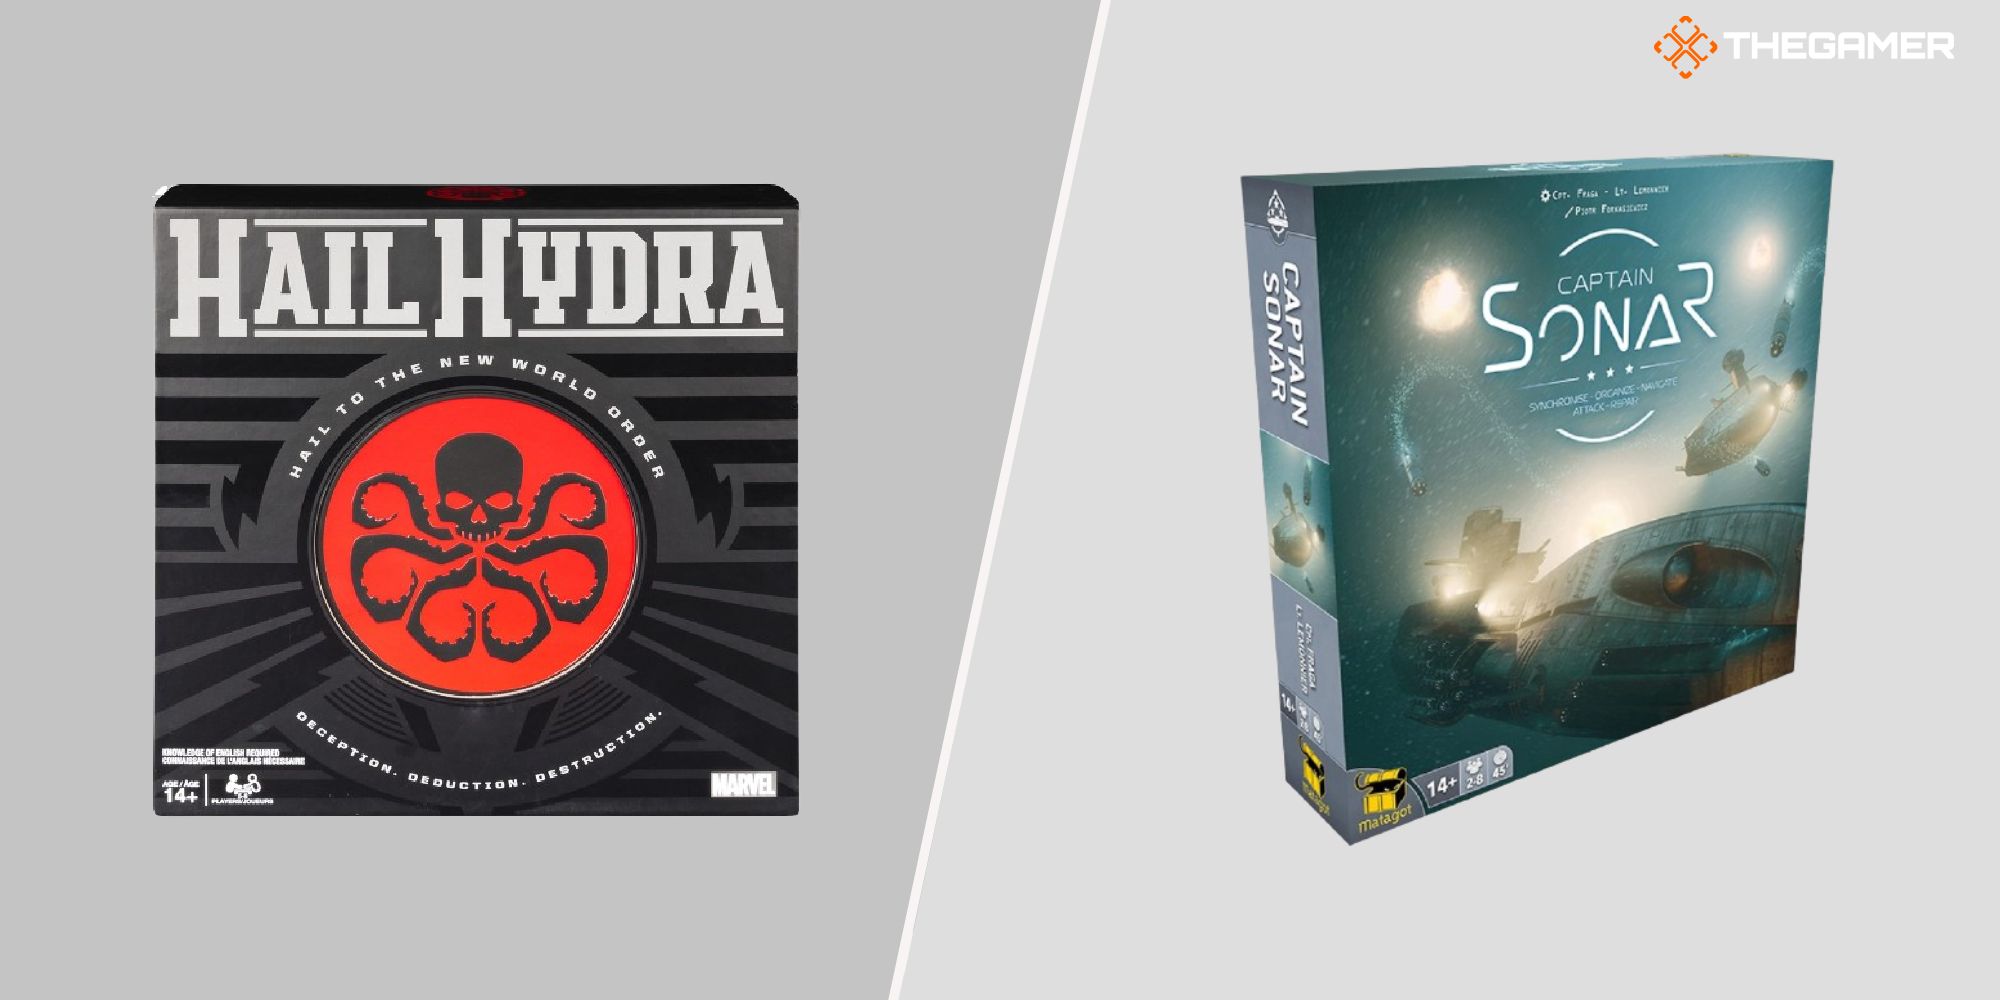 The board games Hail Hydra and Captain Sonar displayed together.